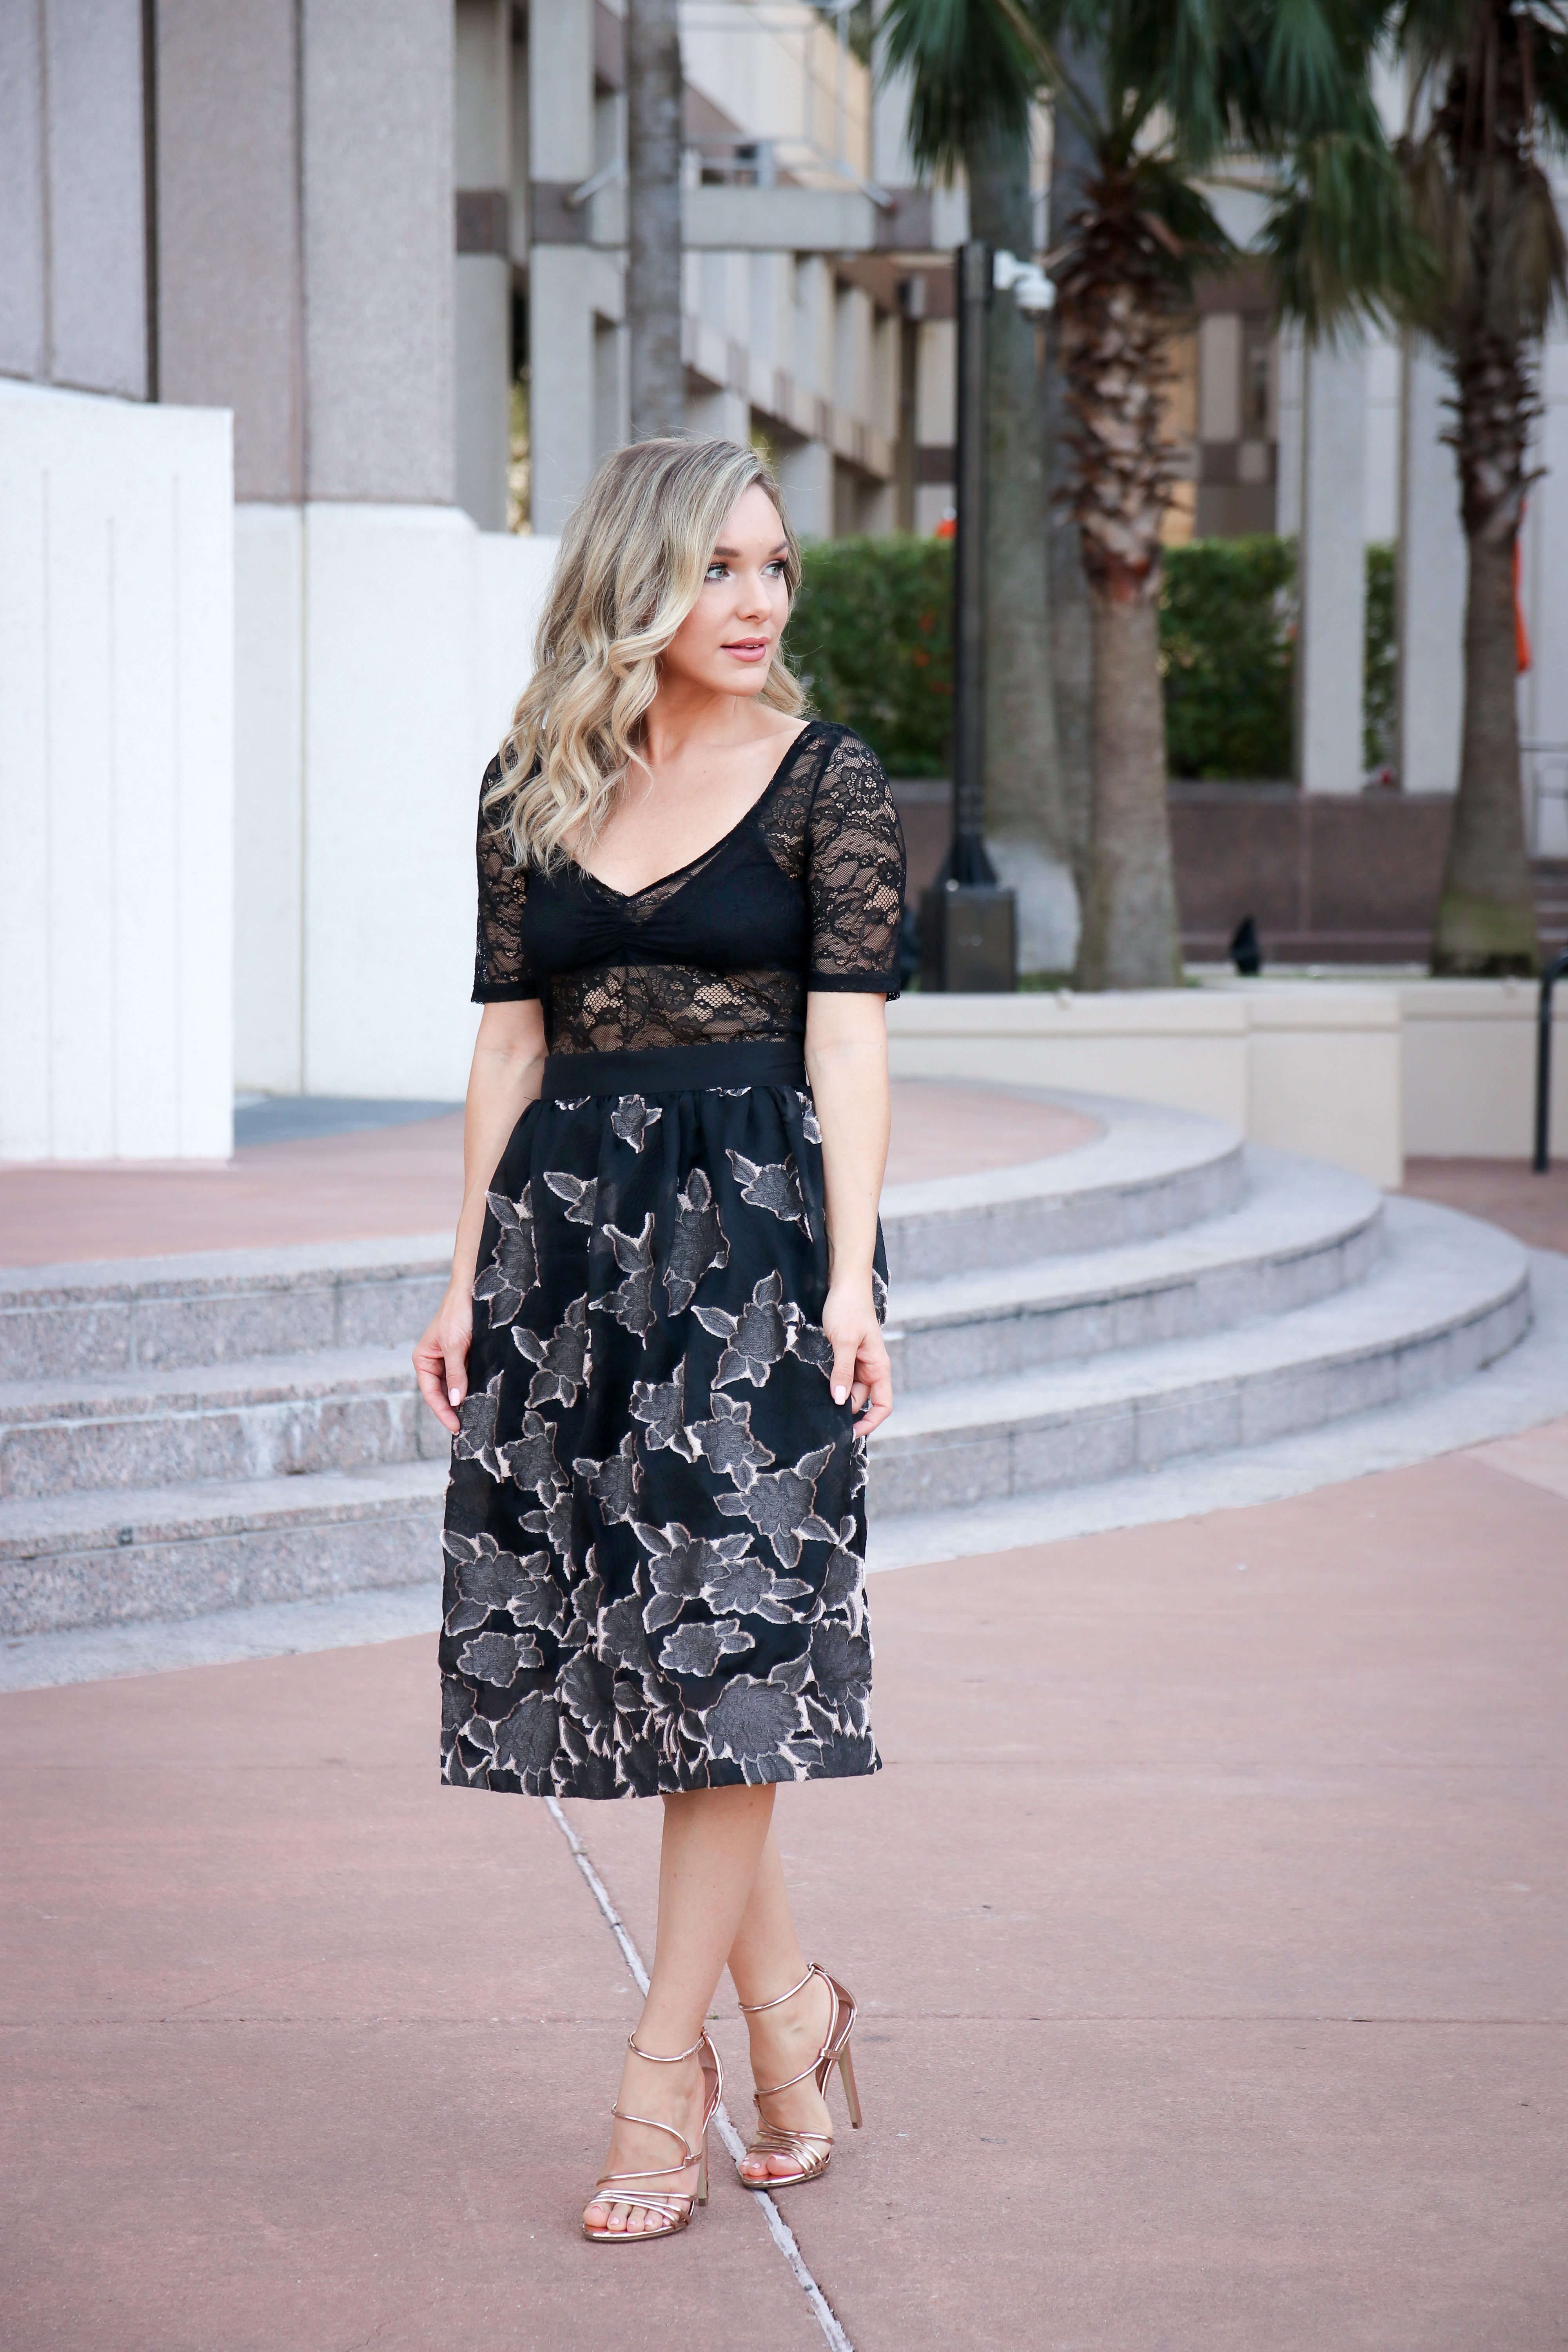 rose gold shoes skirt black lace